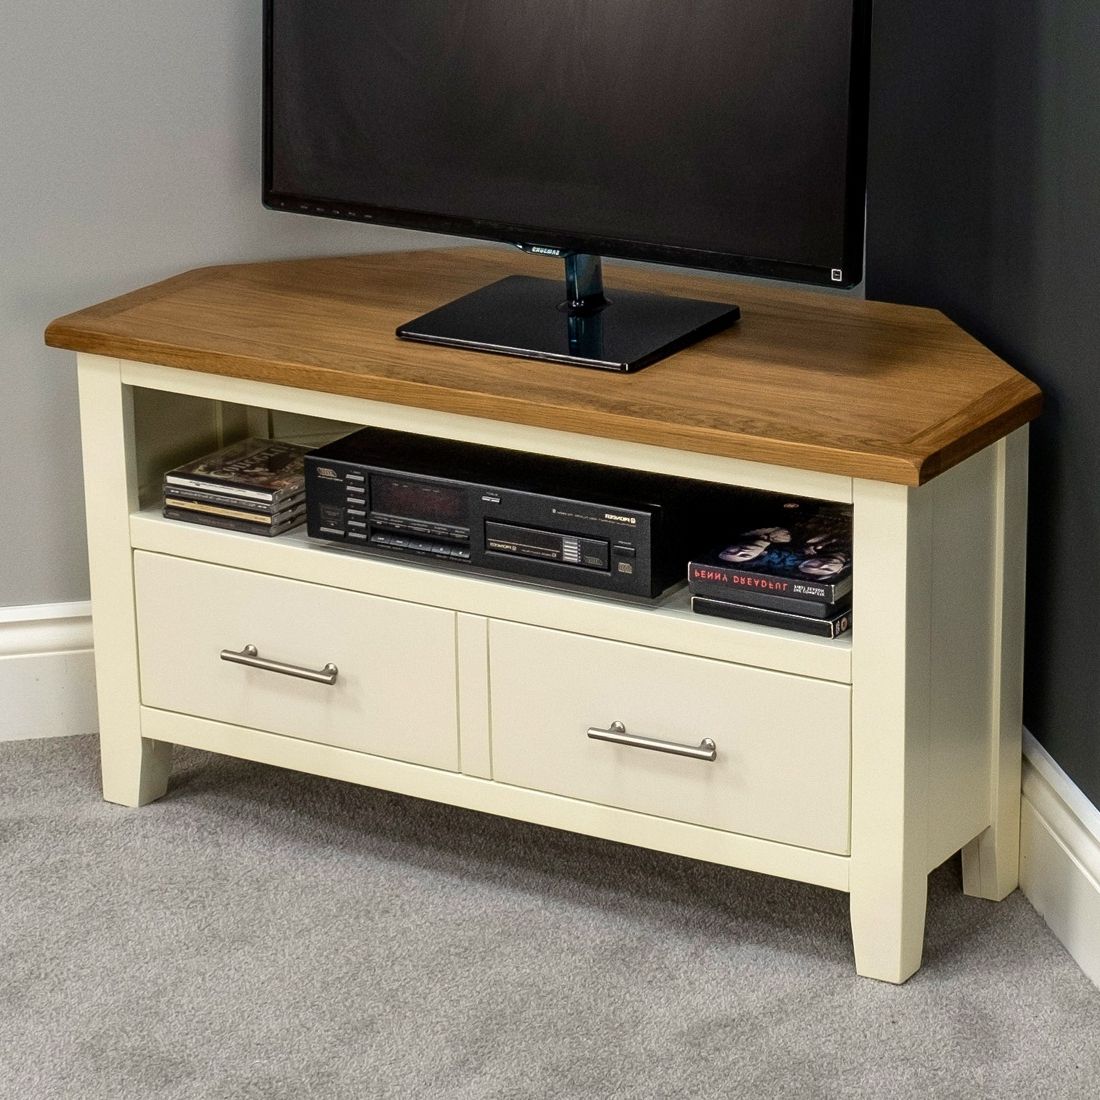 Nebraska Painted Cream Oak Corner Tv Stand / Solid Wood Tv Unit Within Widely Used Cream Corner Tv Stands (View 6 of 20)